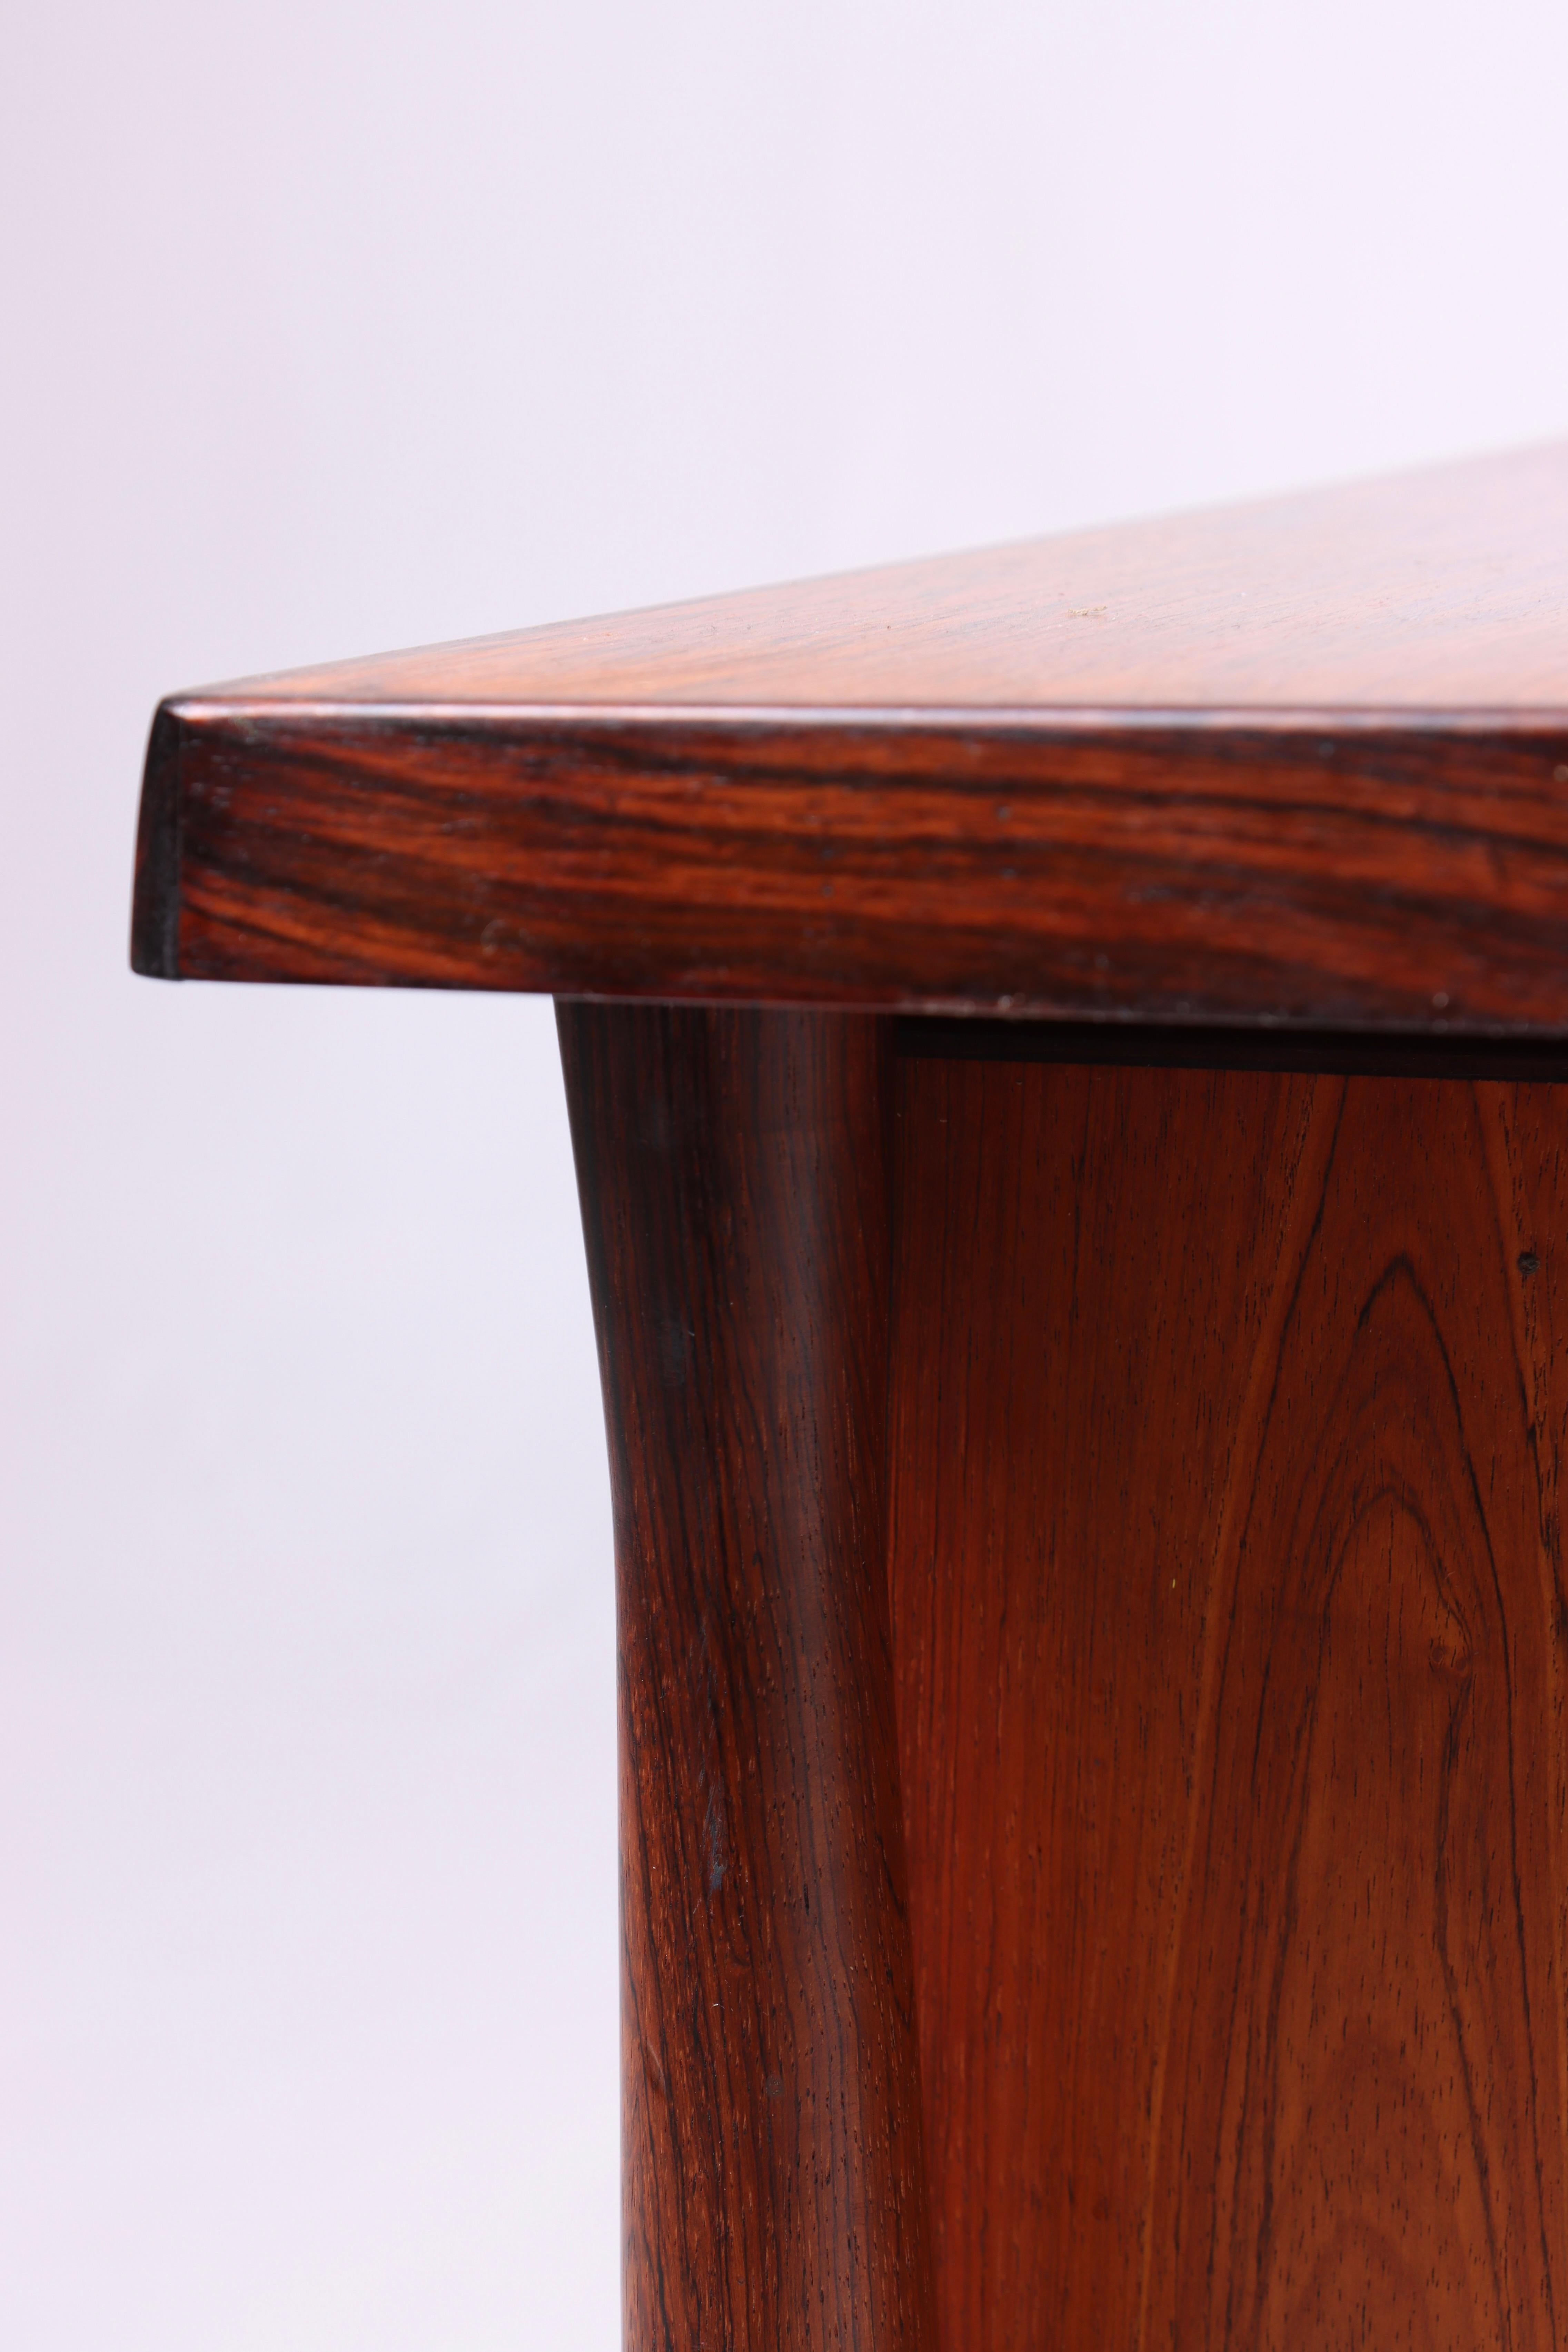 Midcentury Desk in Rosewood, Made in Denmark 1960s For Sale 2